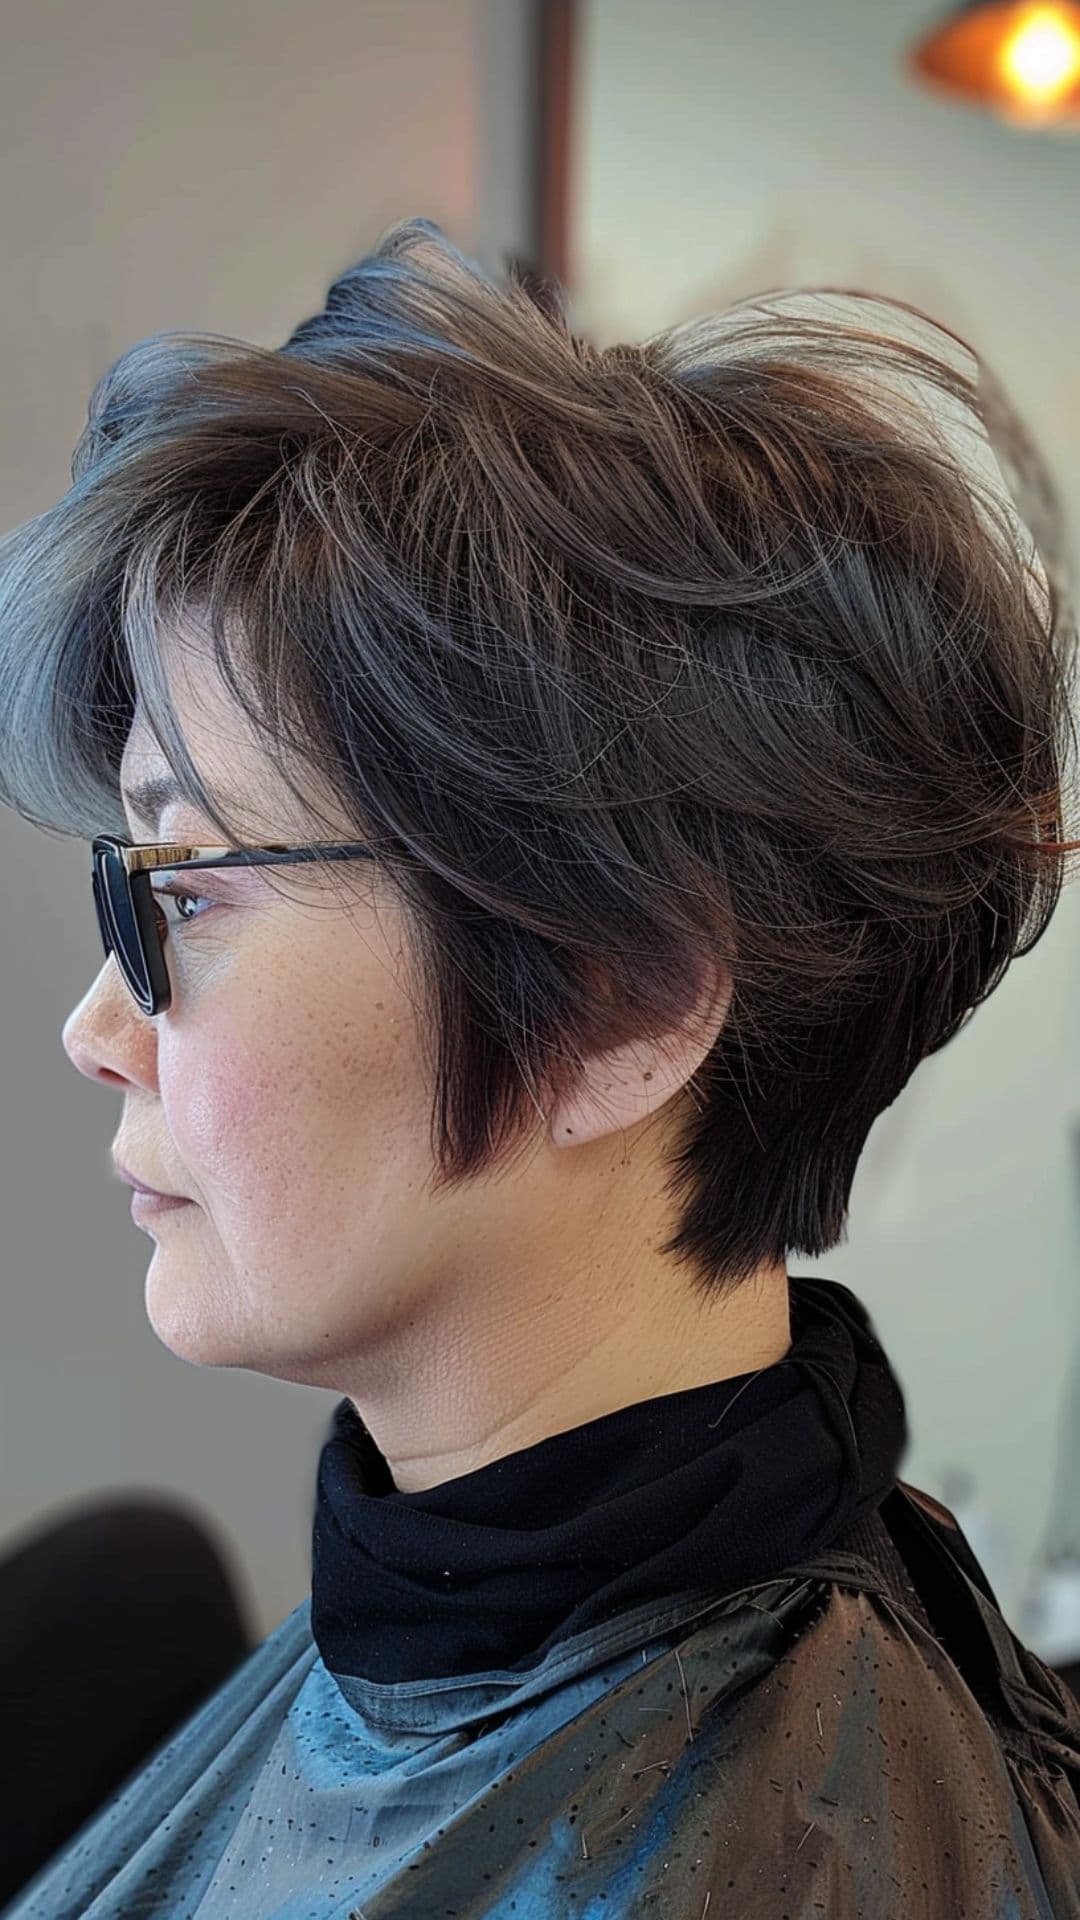 An old woman modelling a textured pixie bob cut.